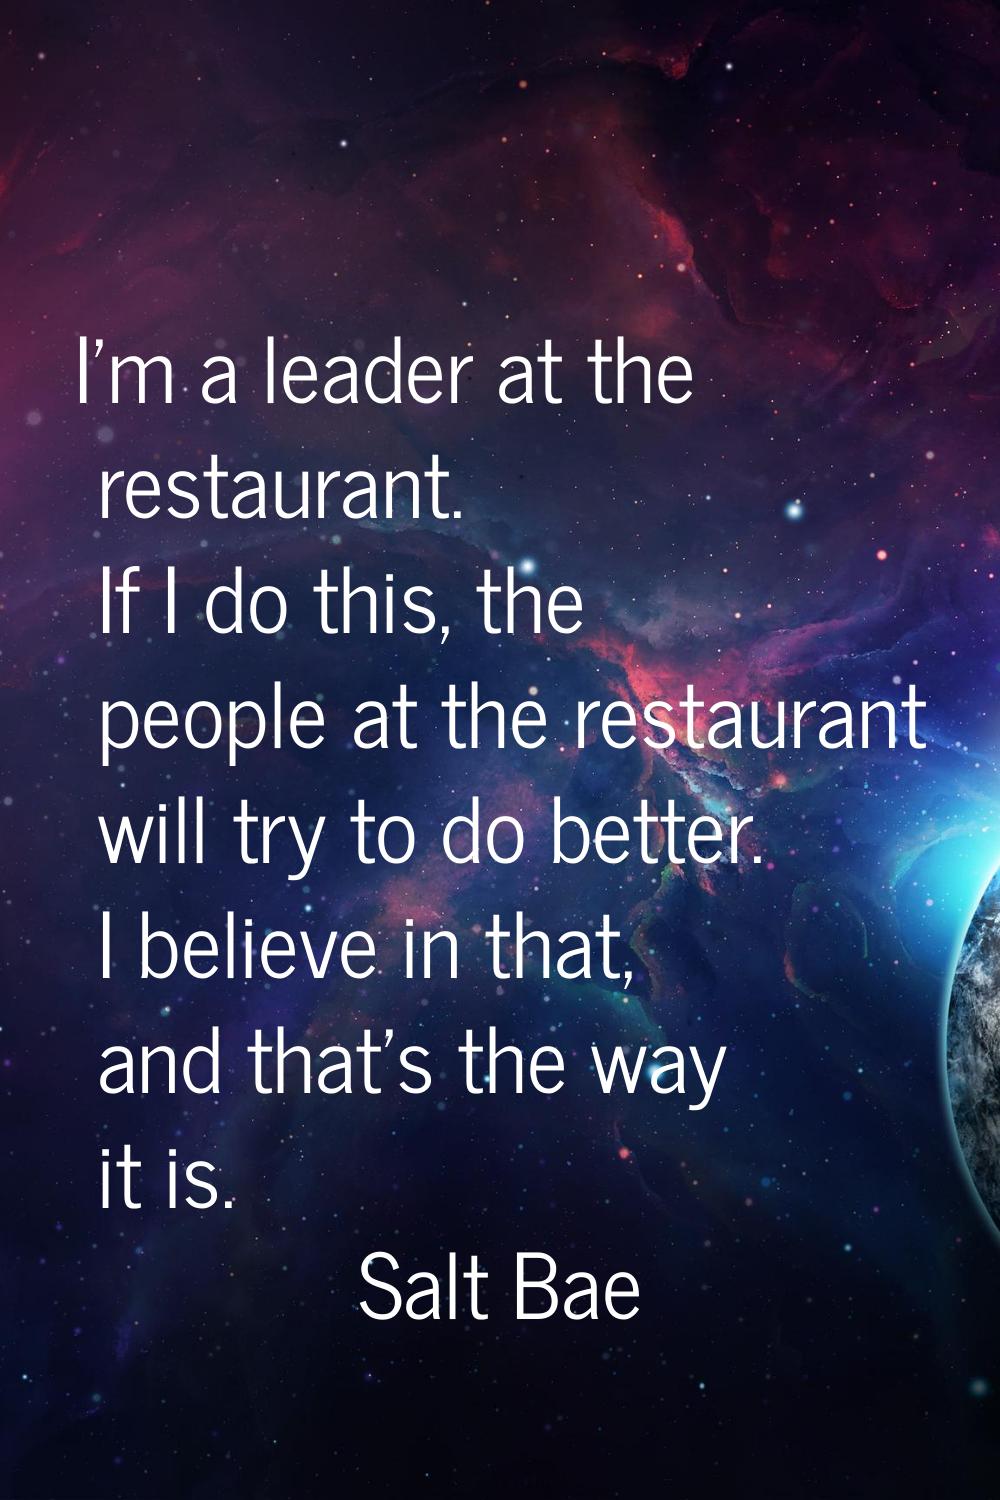 I'm a leader at the restaurant. If I do this, the people at the restaurant will try to do better. I